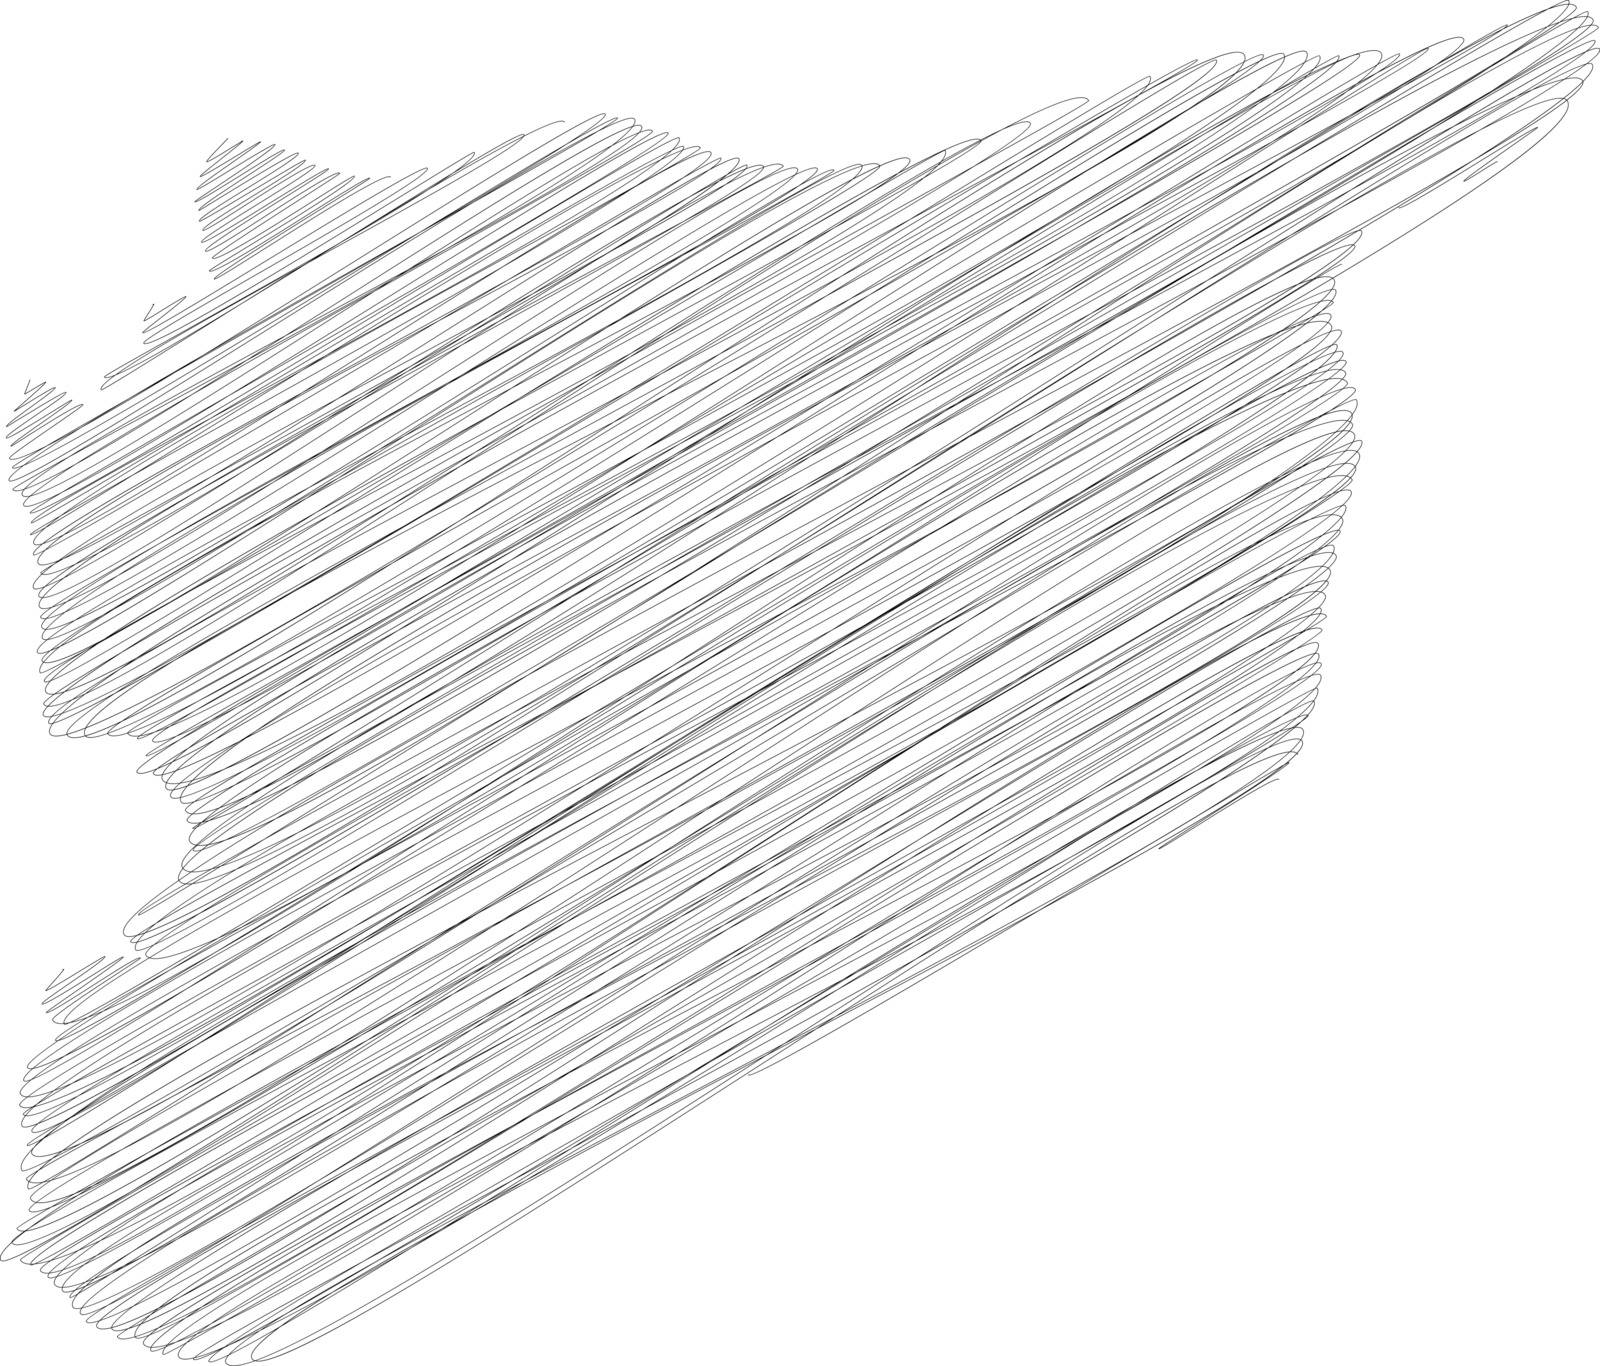 Syria - pencil scribble sketch silhouette map of country area with dropped shadow. Simple flat vector illustration.